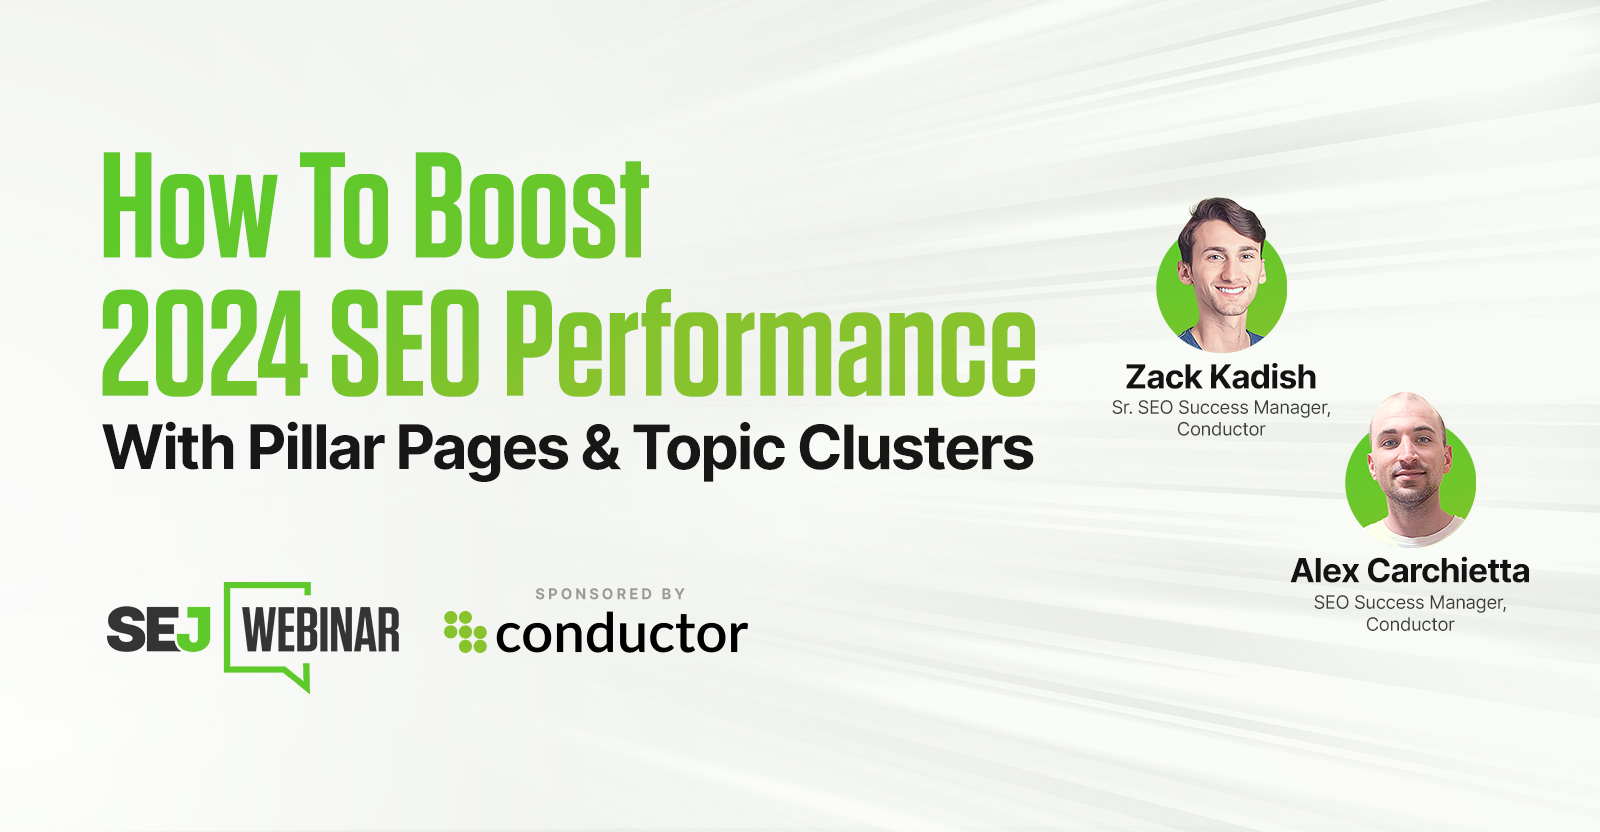 Upgrade Your SEO & Content Strategy With Pillar Pages & Topic Clusters [Webinar] via @sejournal, @hethr_campbell